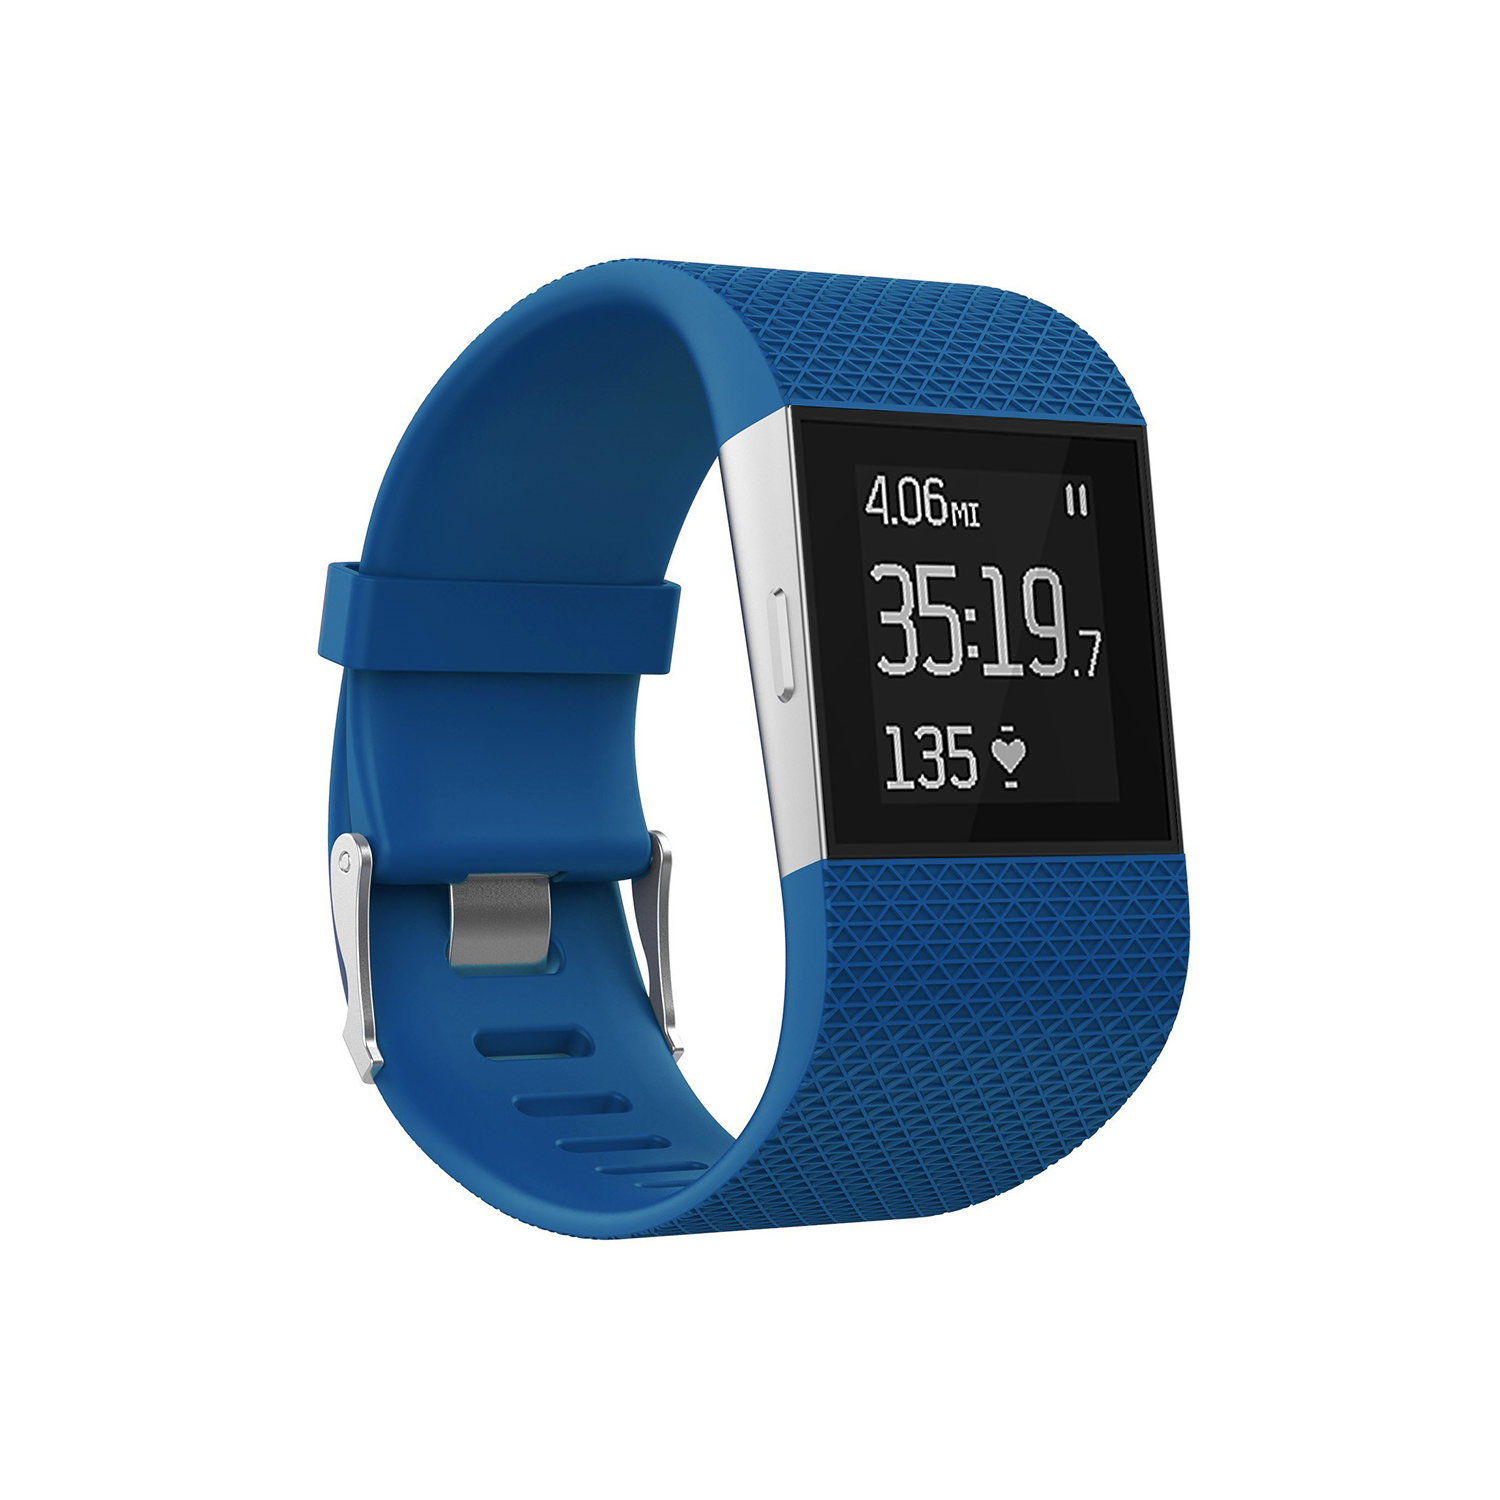 StrapsCo Silicone Rubber Strap for Fitbit Surge Strap in Royal Blue /Short -Medium Length